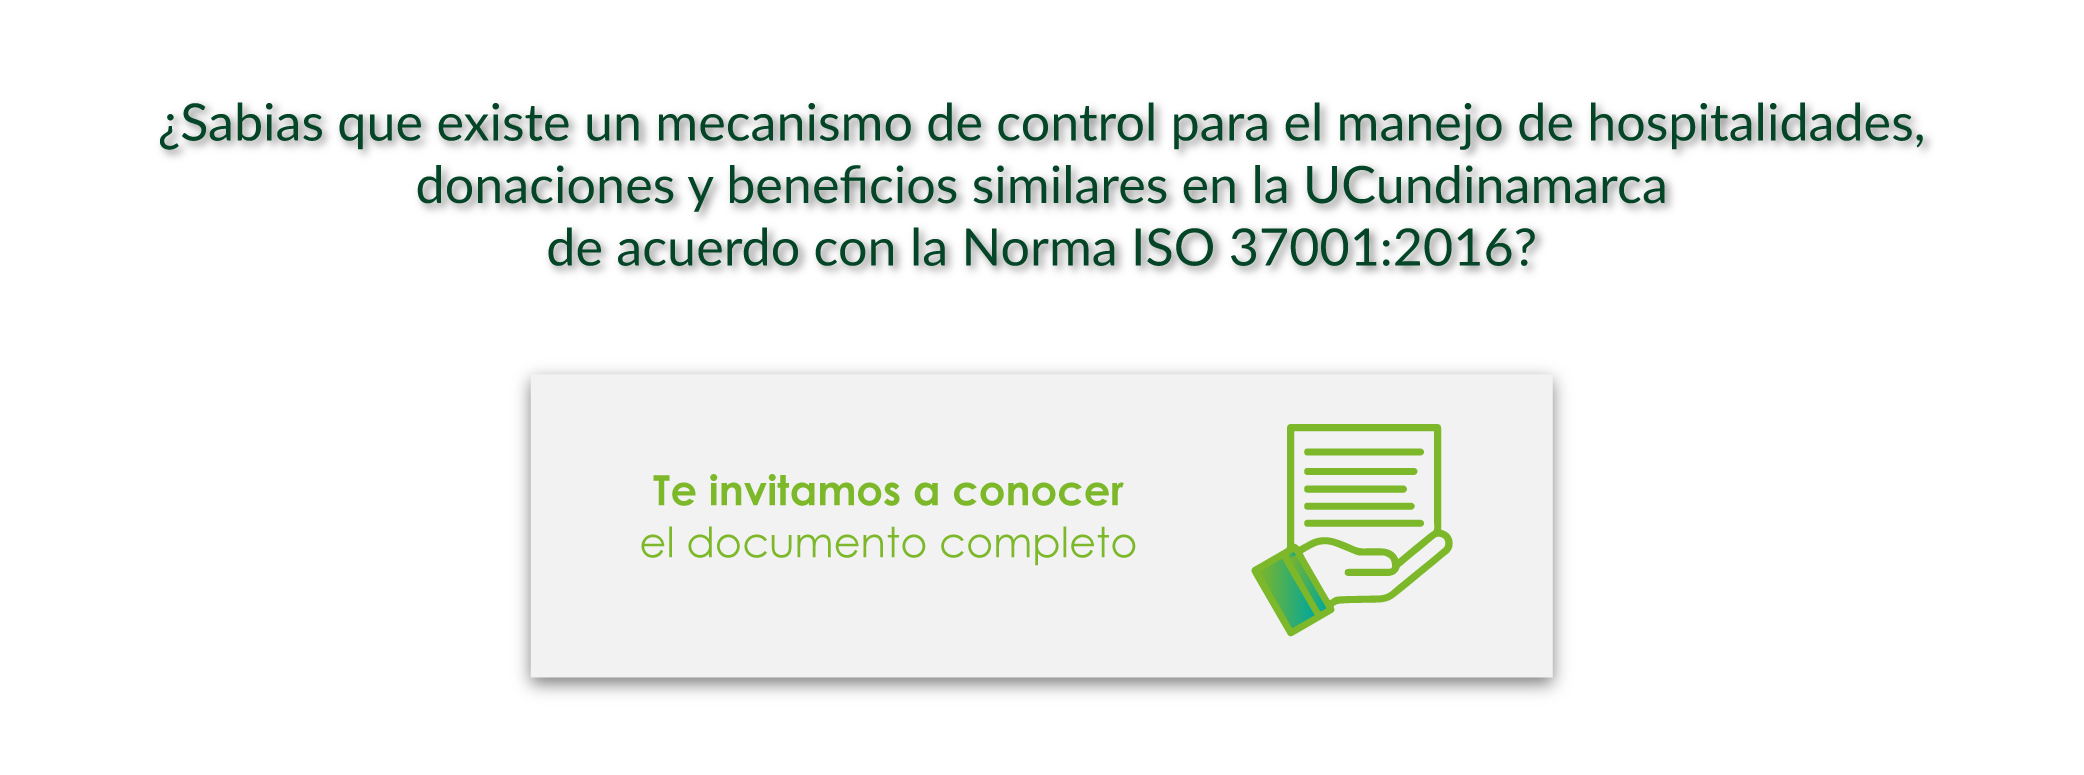 norma iso 37001:2016